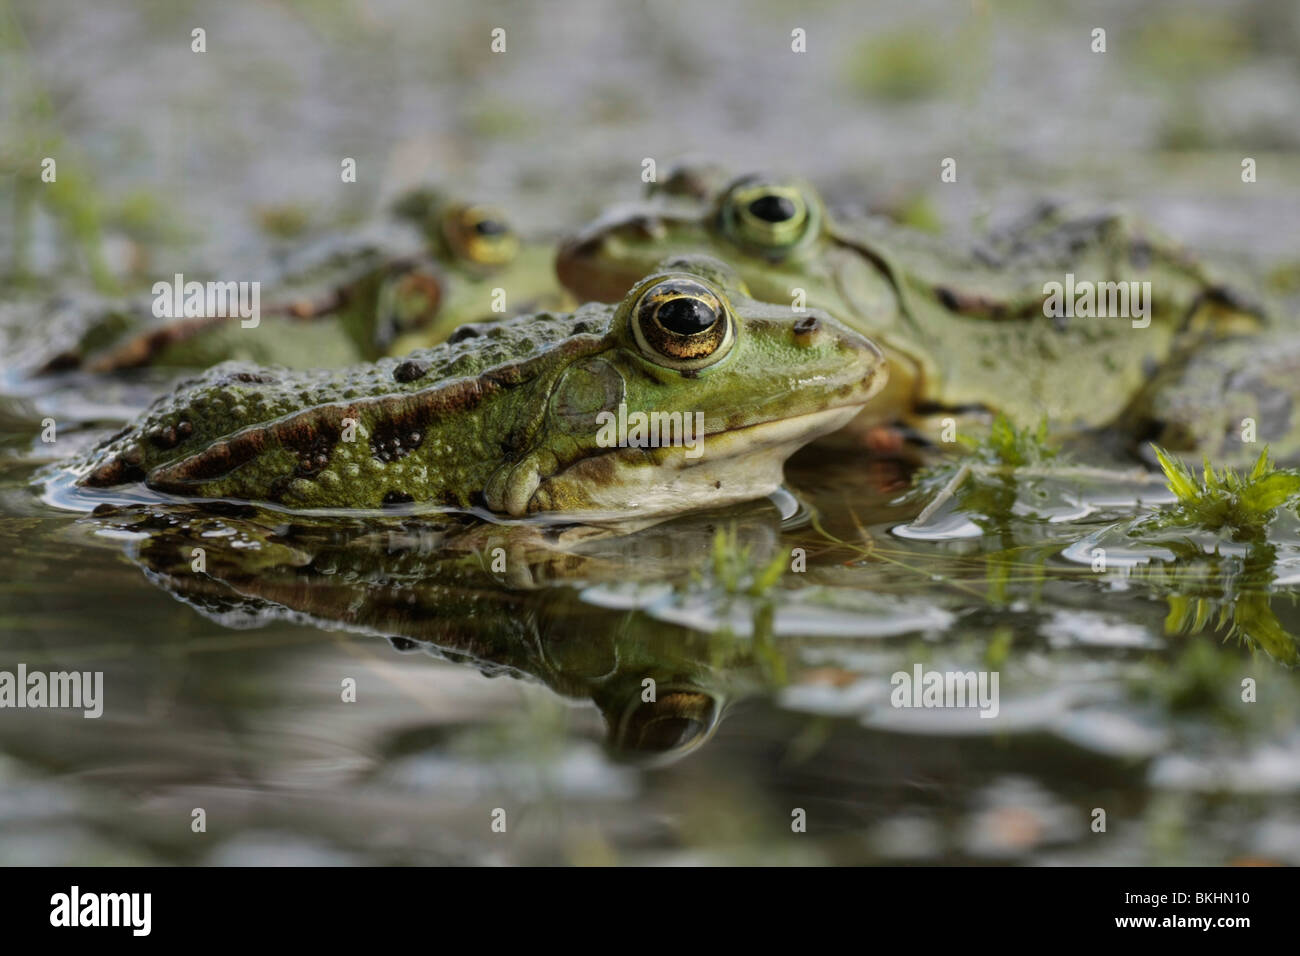 Three Mini Frogs Different Colors Sitting Stock Photo 2230919377